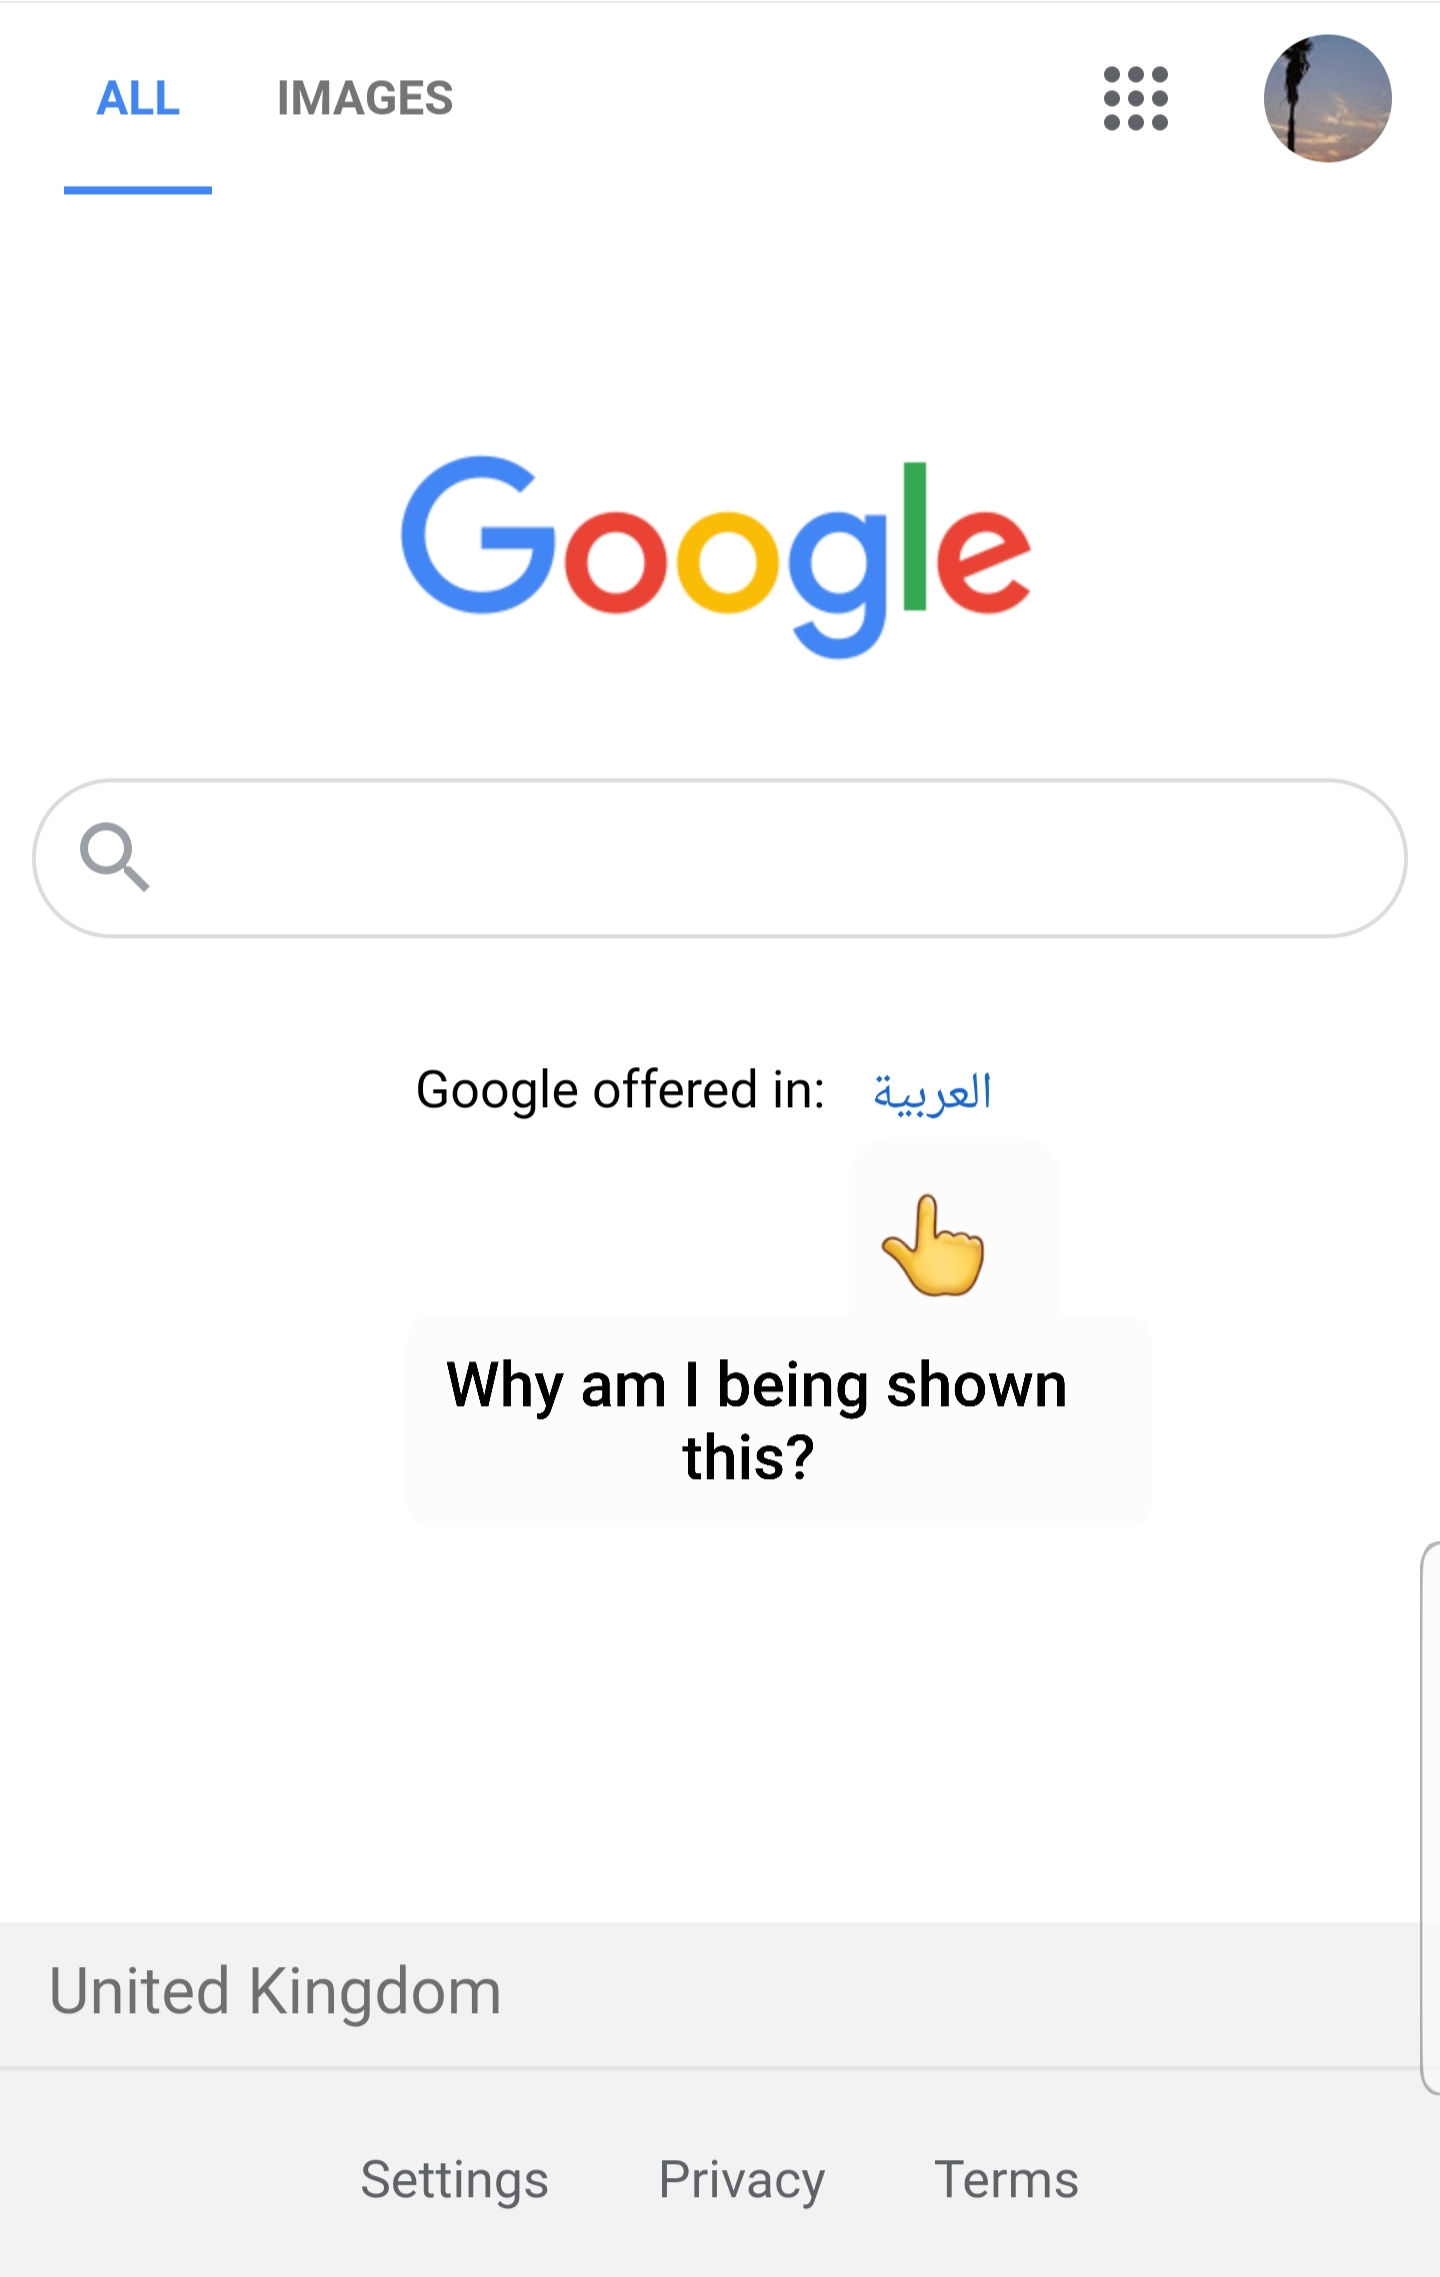 Why Am I Seeing - Google Offered In Arabic? I Don't Want It And Want It Removed! - Google Search Community